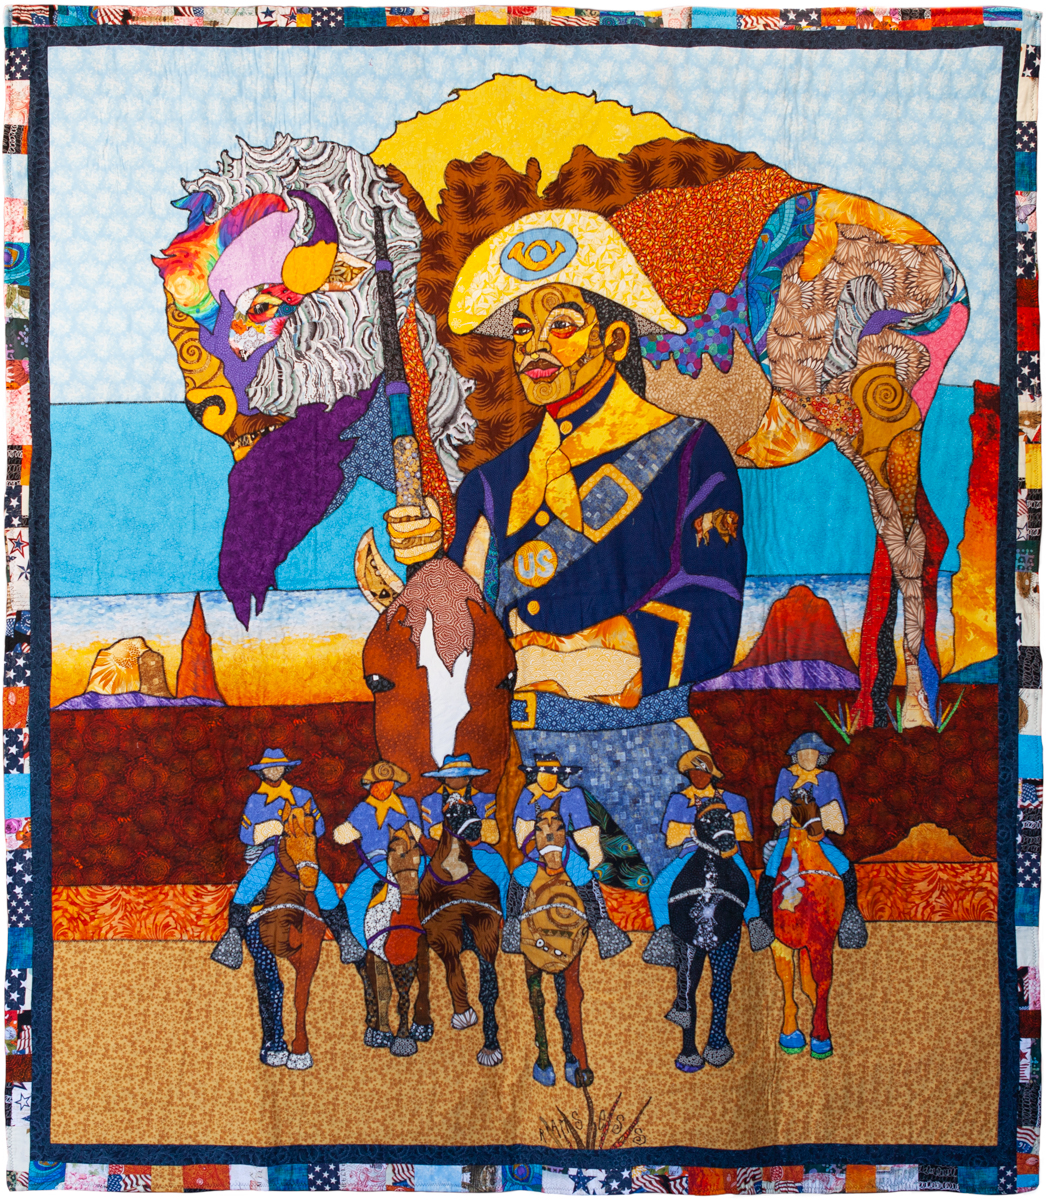 Ramsess, Cathay Williams, Buffalo Soldier, 2016. Fabric. 60 x 70 inches. Photo by Natalie Hon. Courtesy of the artist.